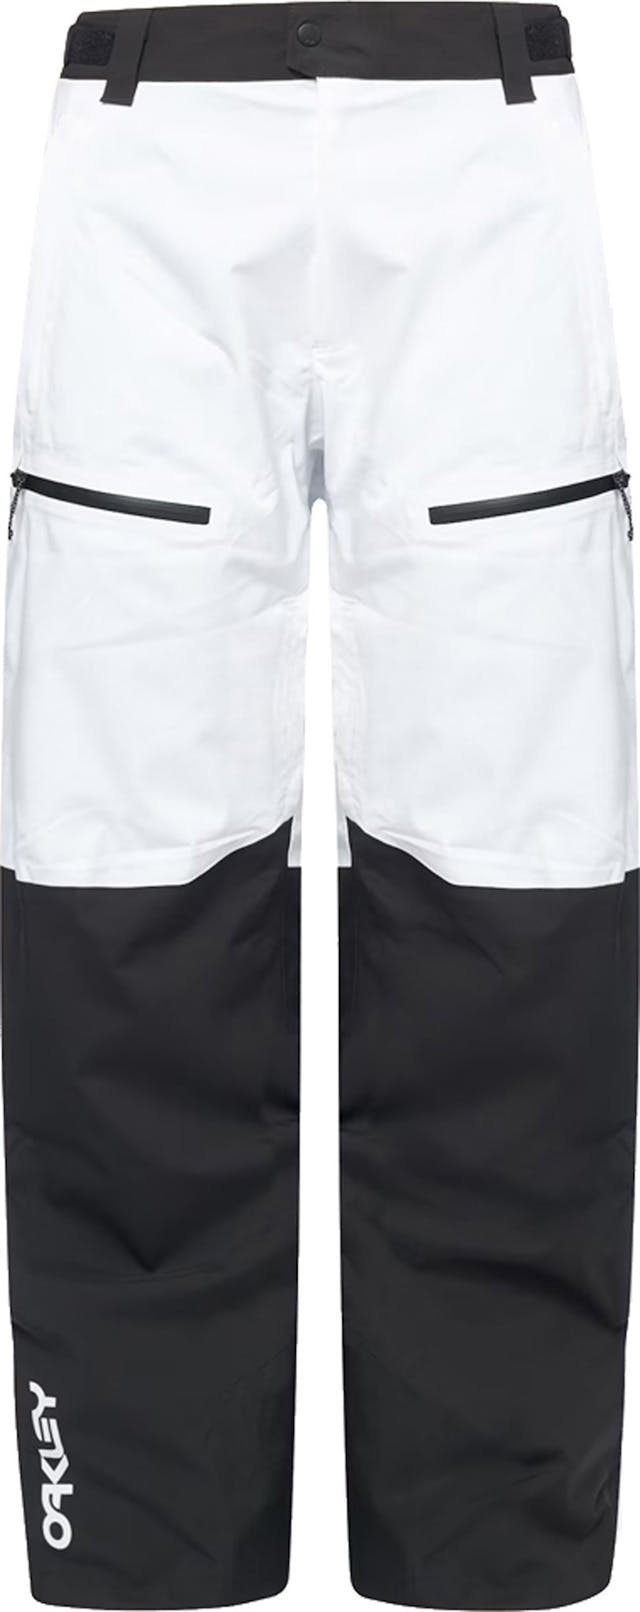 Product image for TNP Lined Shell 2.0 Pant - Men's